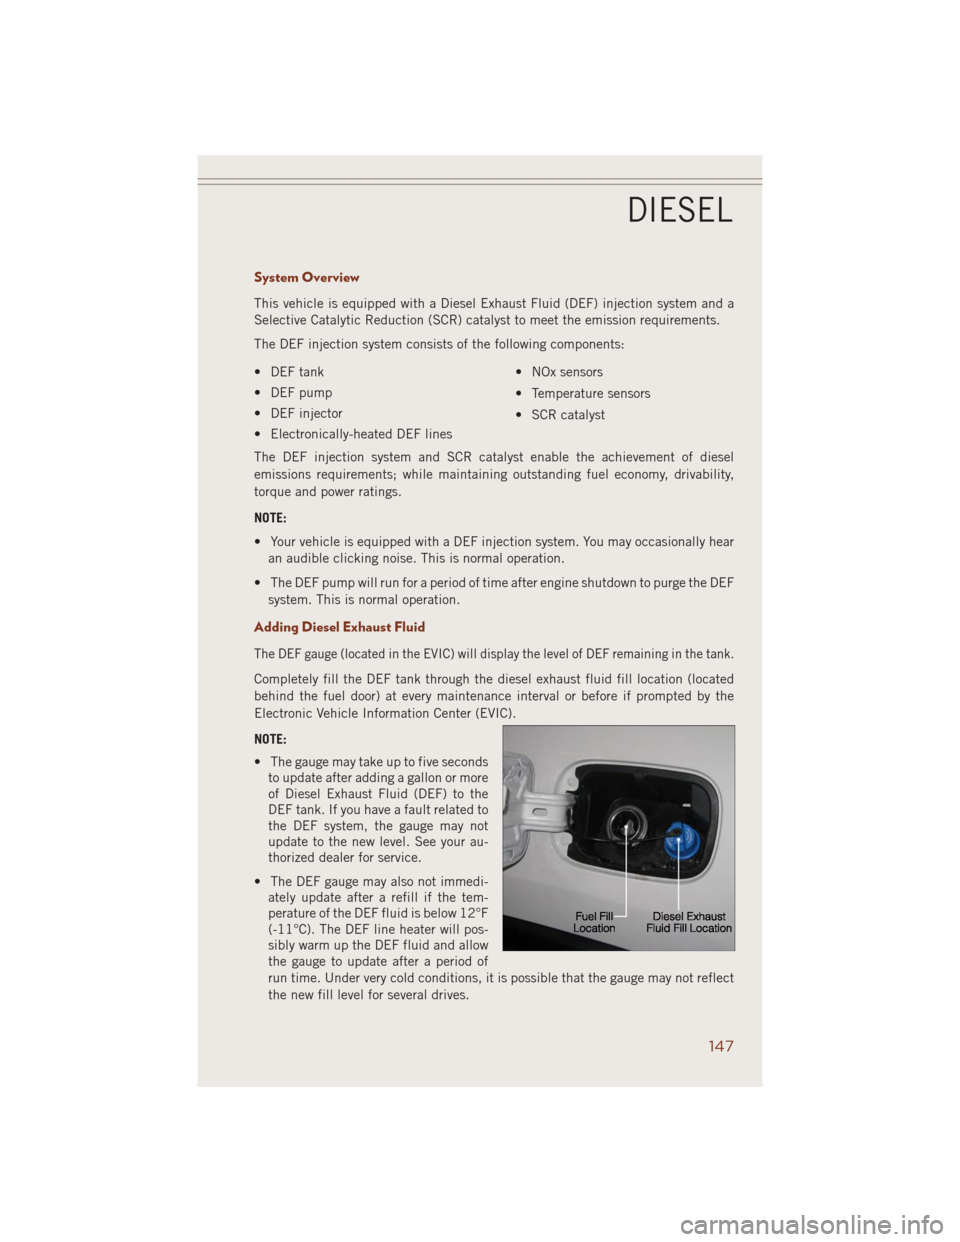 JEEP GRAND CHEROKEE 2014 WK2 / 4.G User Guide System Overview
This vehicle is equipped with a Diesel Exhaust Fluid (DEF) injection system and a
Selective Catalytic Reduction (SCR) catalyst to meet the emission requirements.
The DEF injection syst